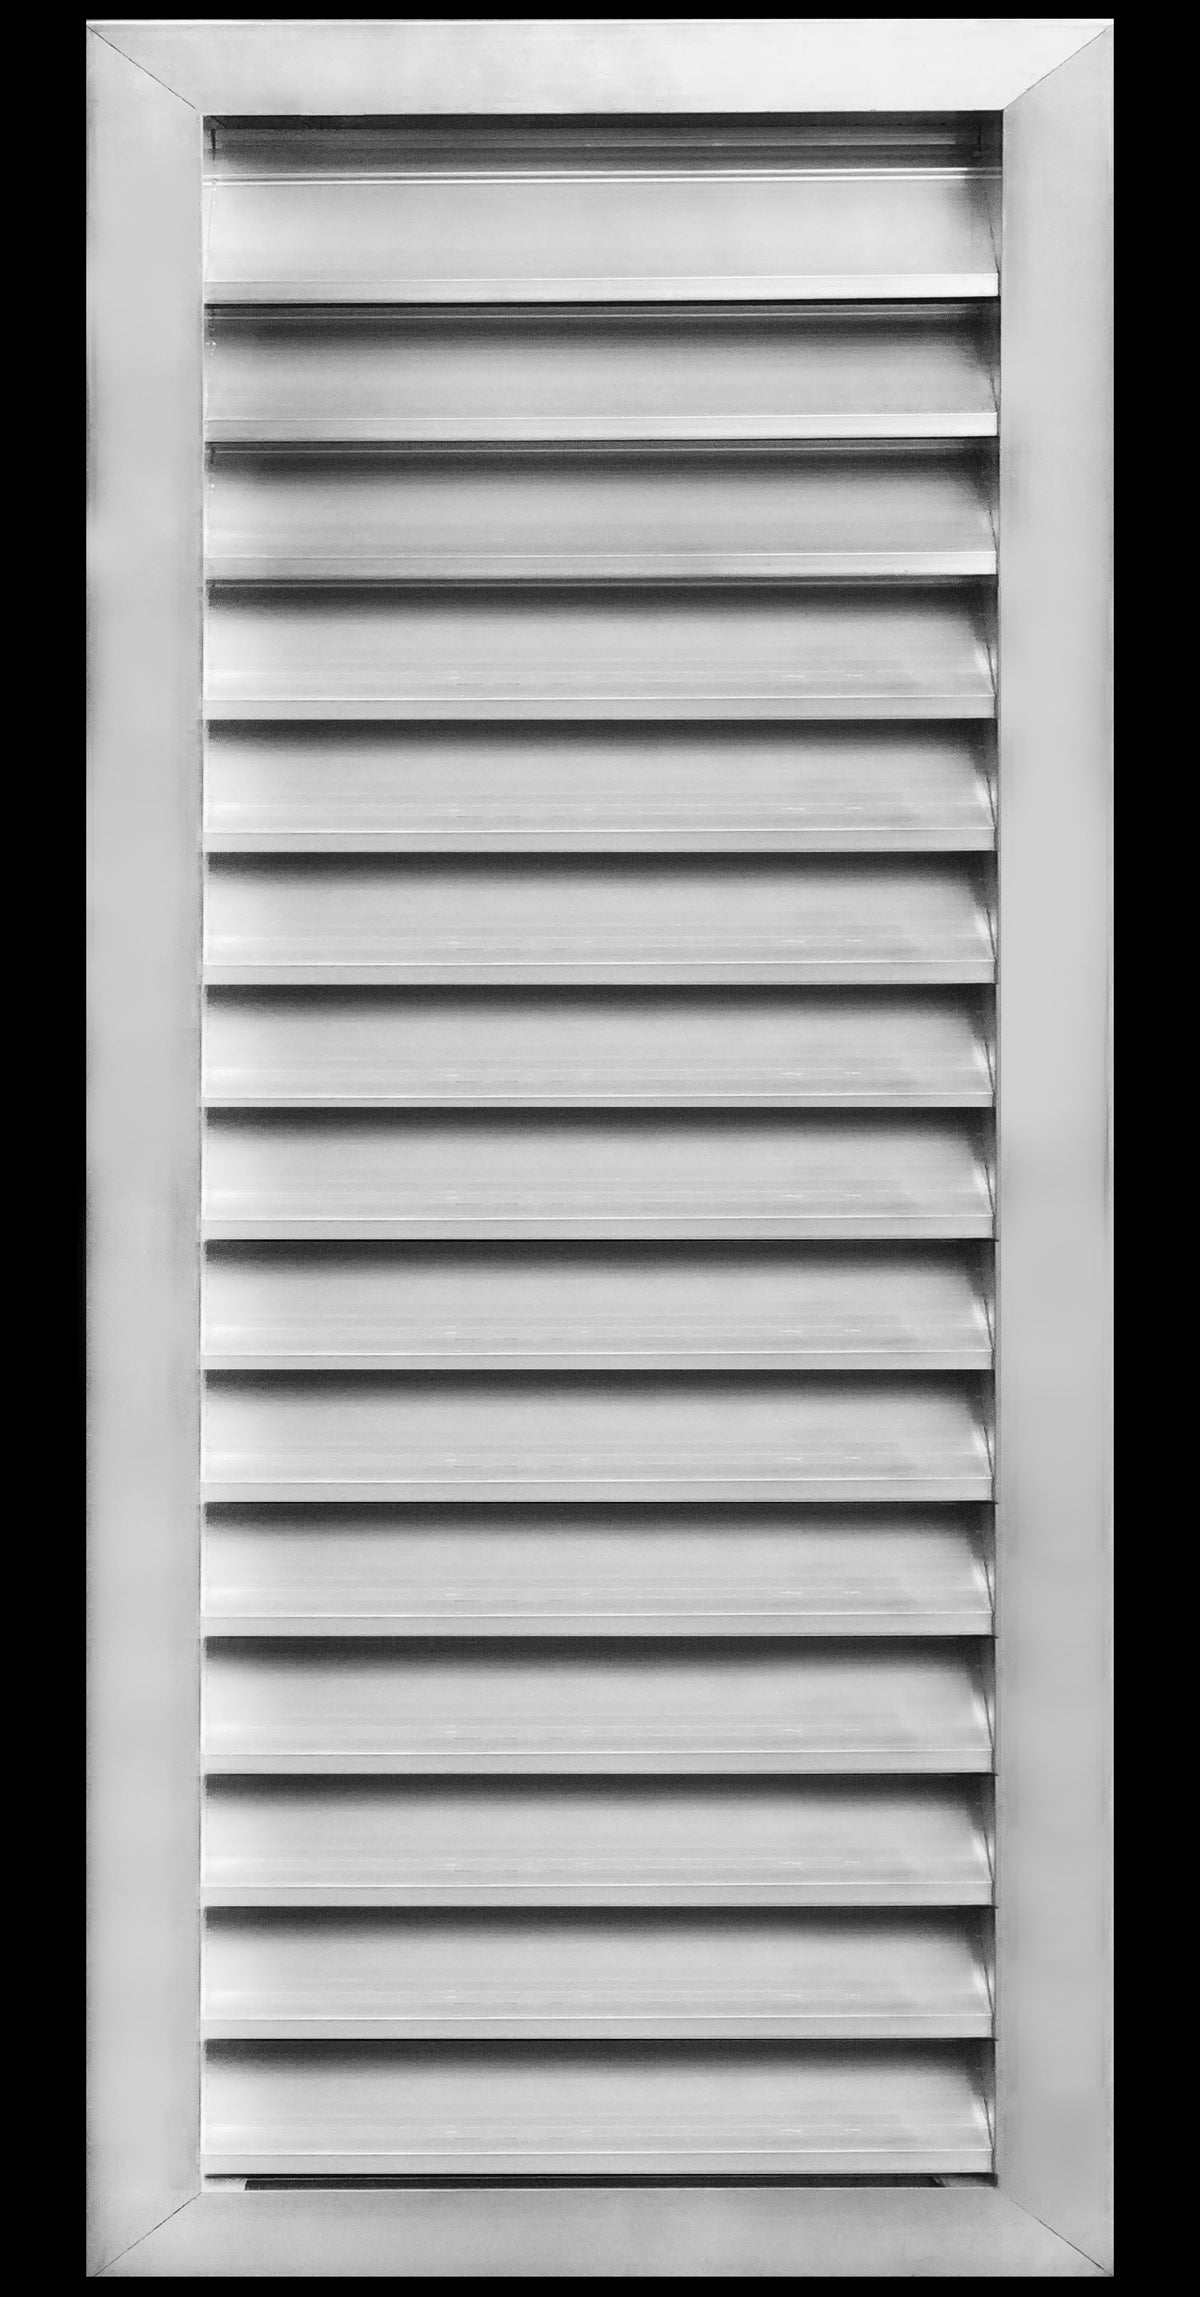 14&quot;w X 36&quot;h Aluminum Outdoor Weather Proof Louvers - Rain &amp; Waterproof Air Vent With Screen Mesh